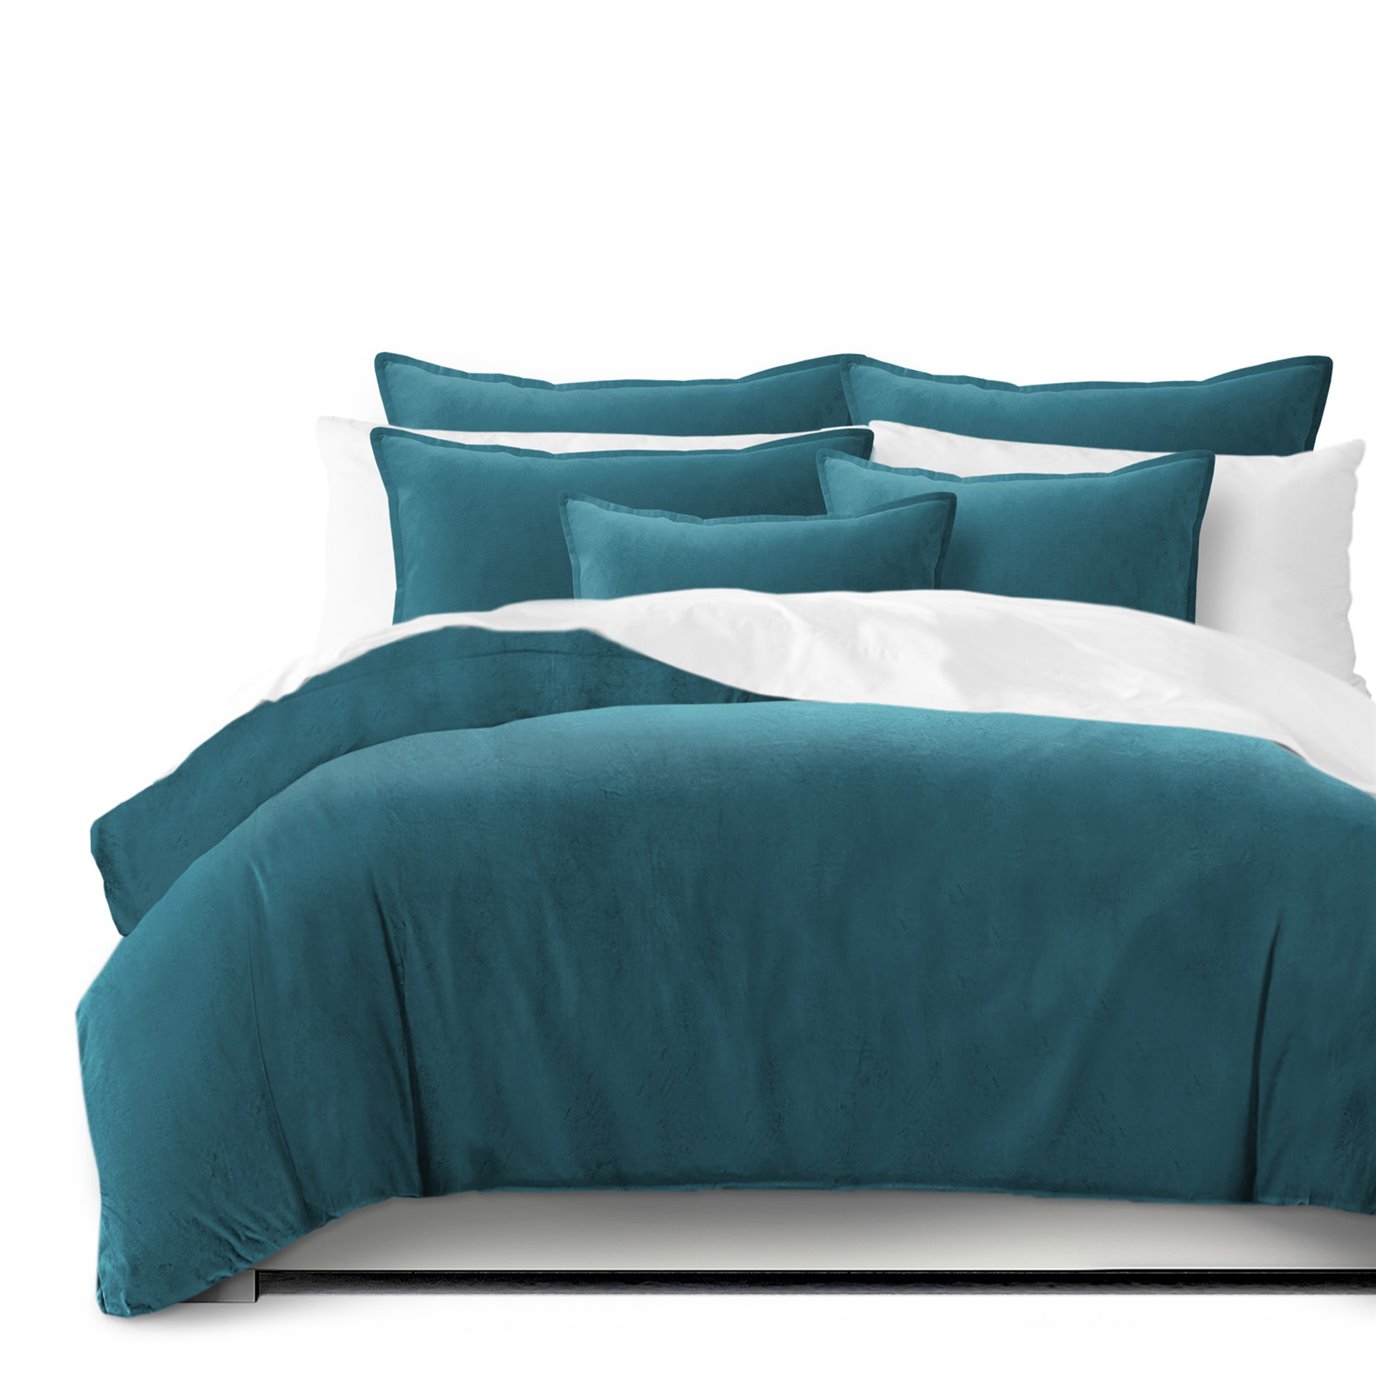 Vanessa Turquoise Duvet Cover and Pillow Sham(s) Set - Size Twin